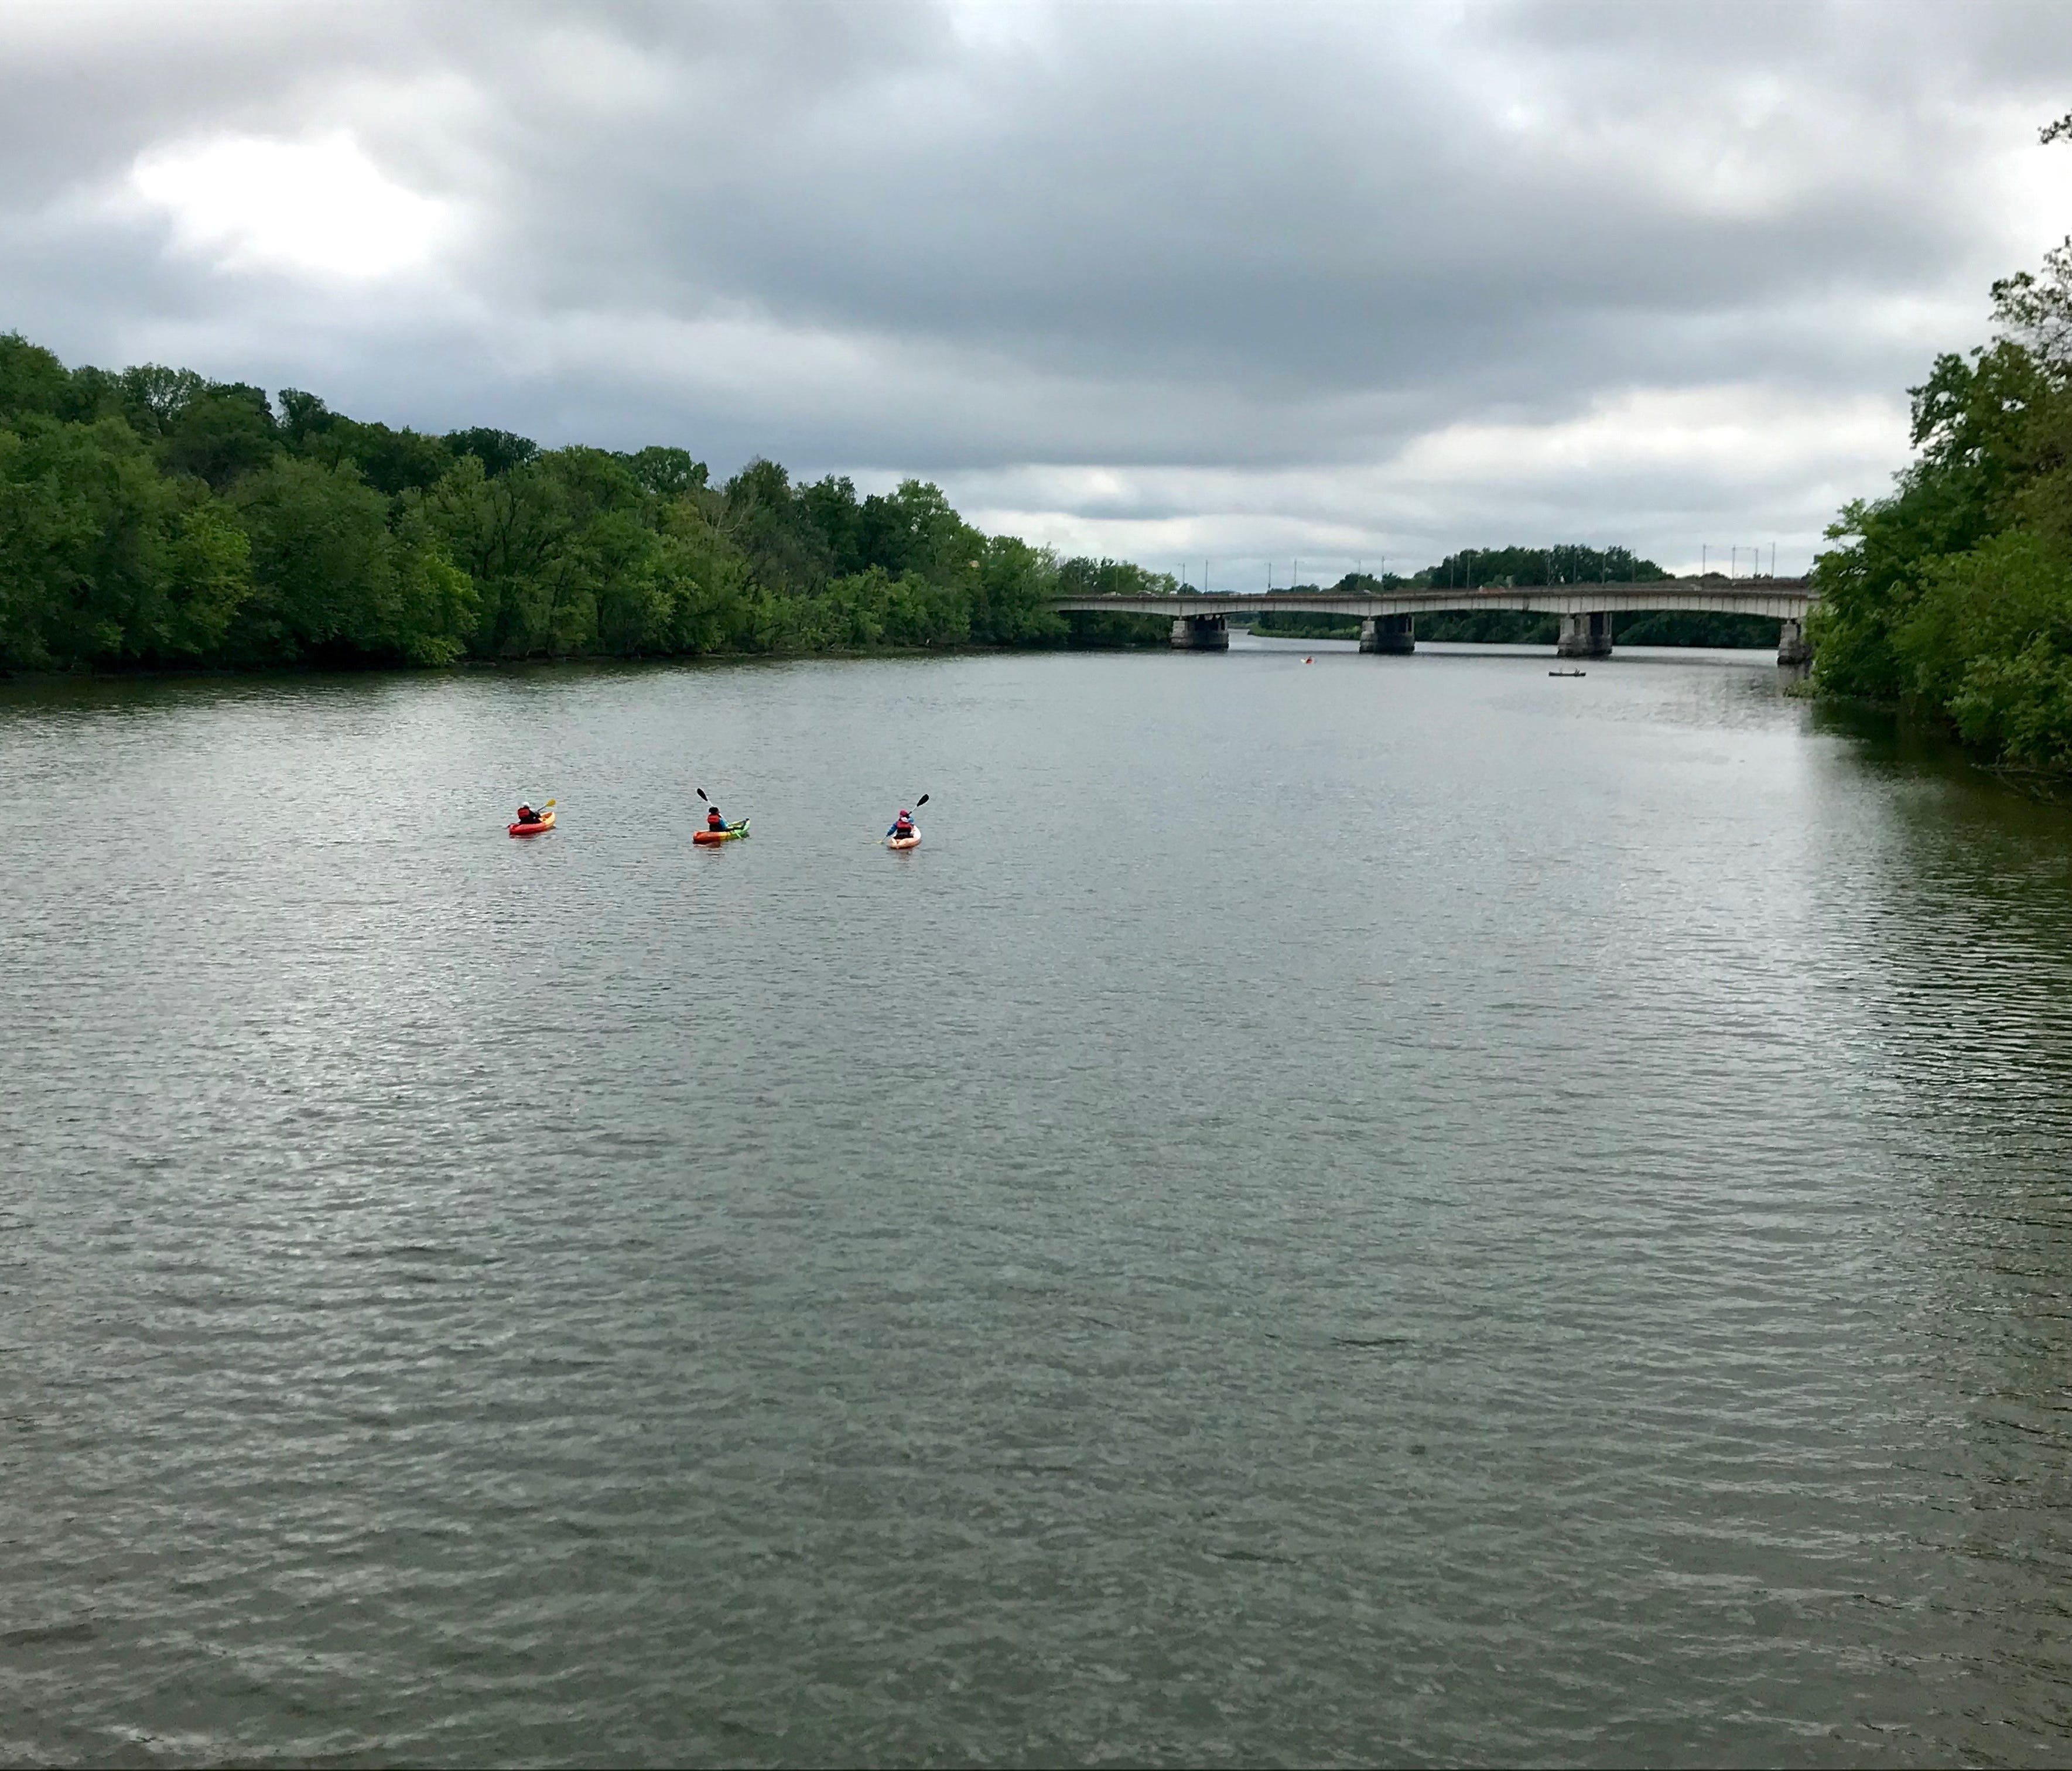 Kayakers paddled through the Potomac River around Theodore Roosevelt Island near Arlington on May 13.